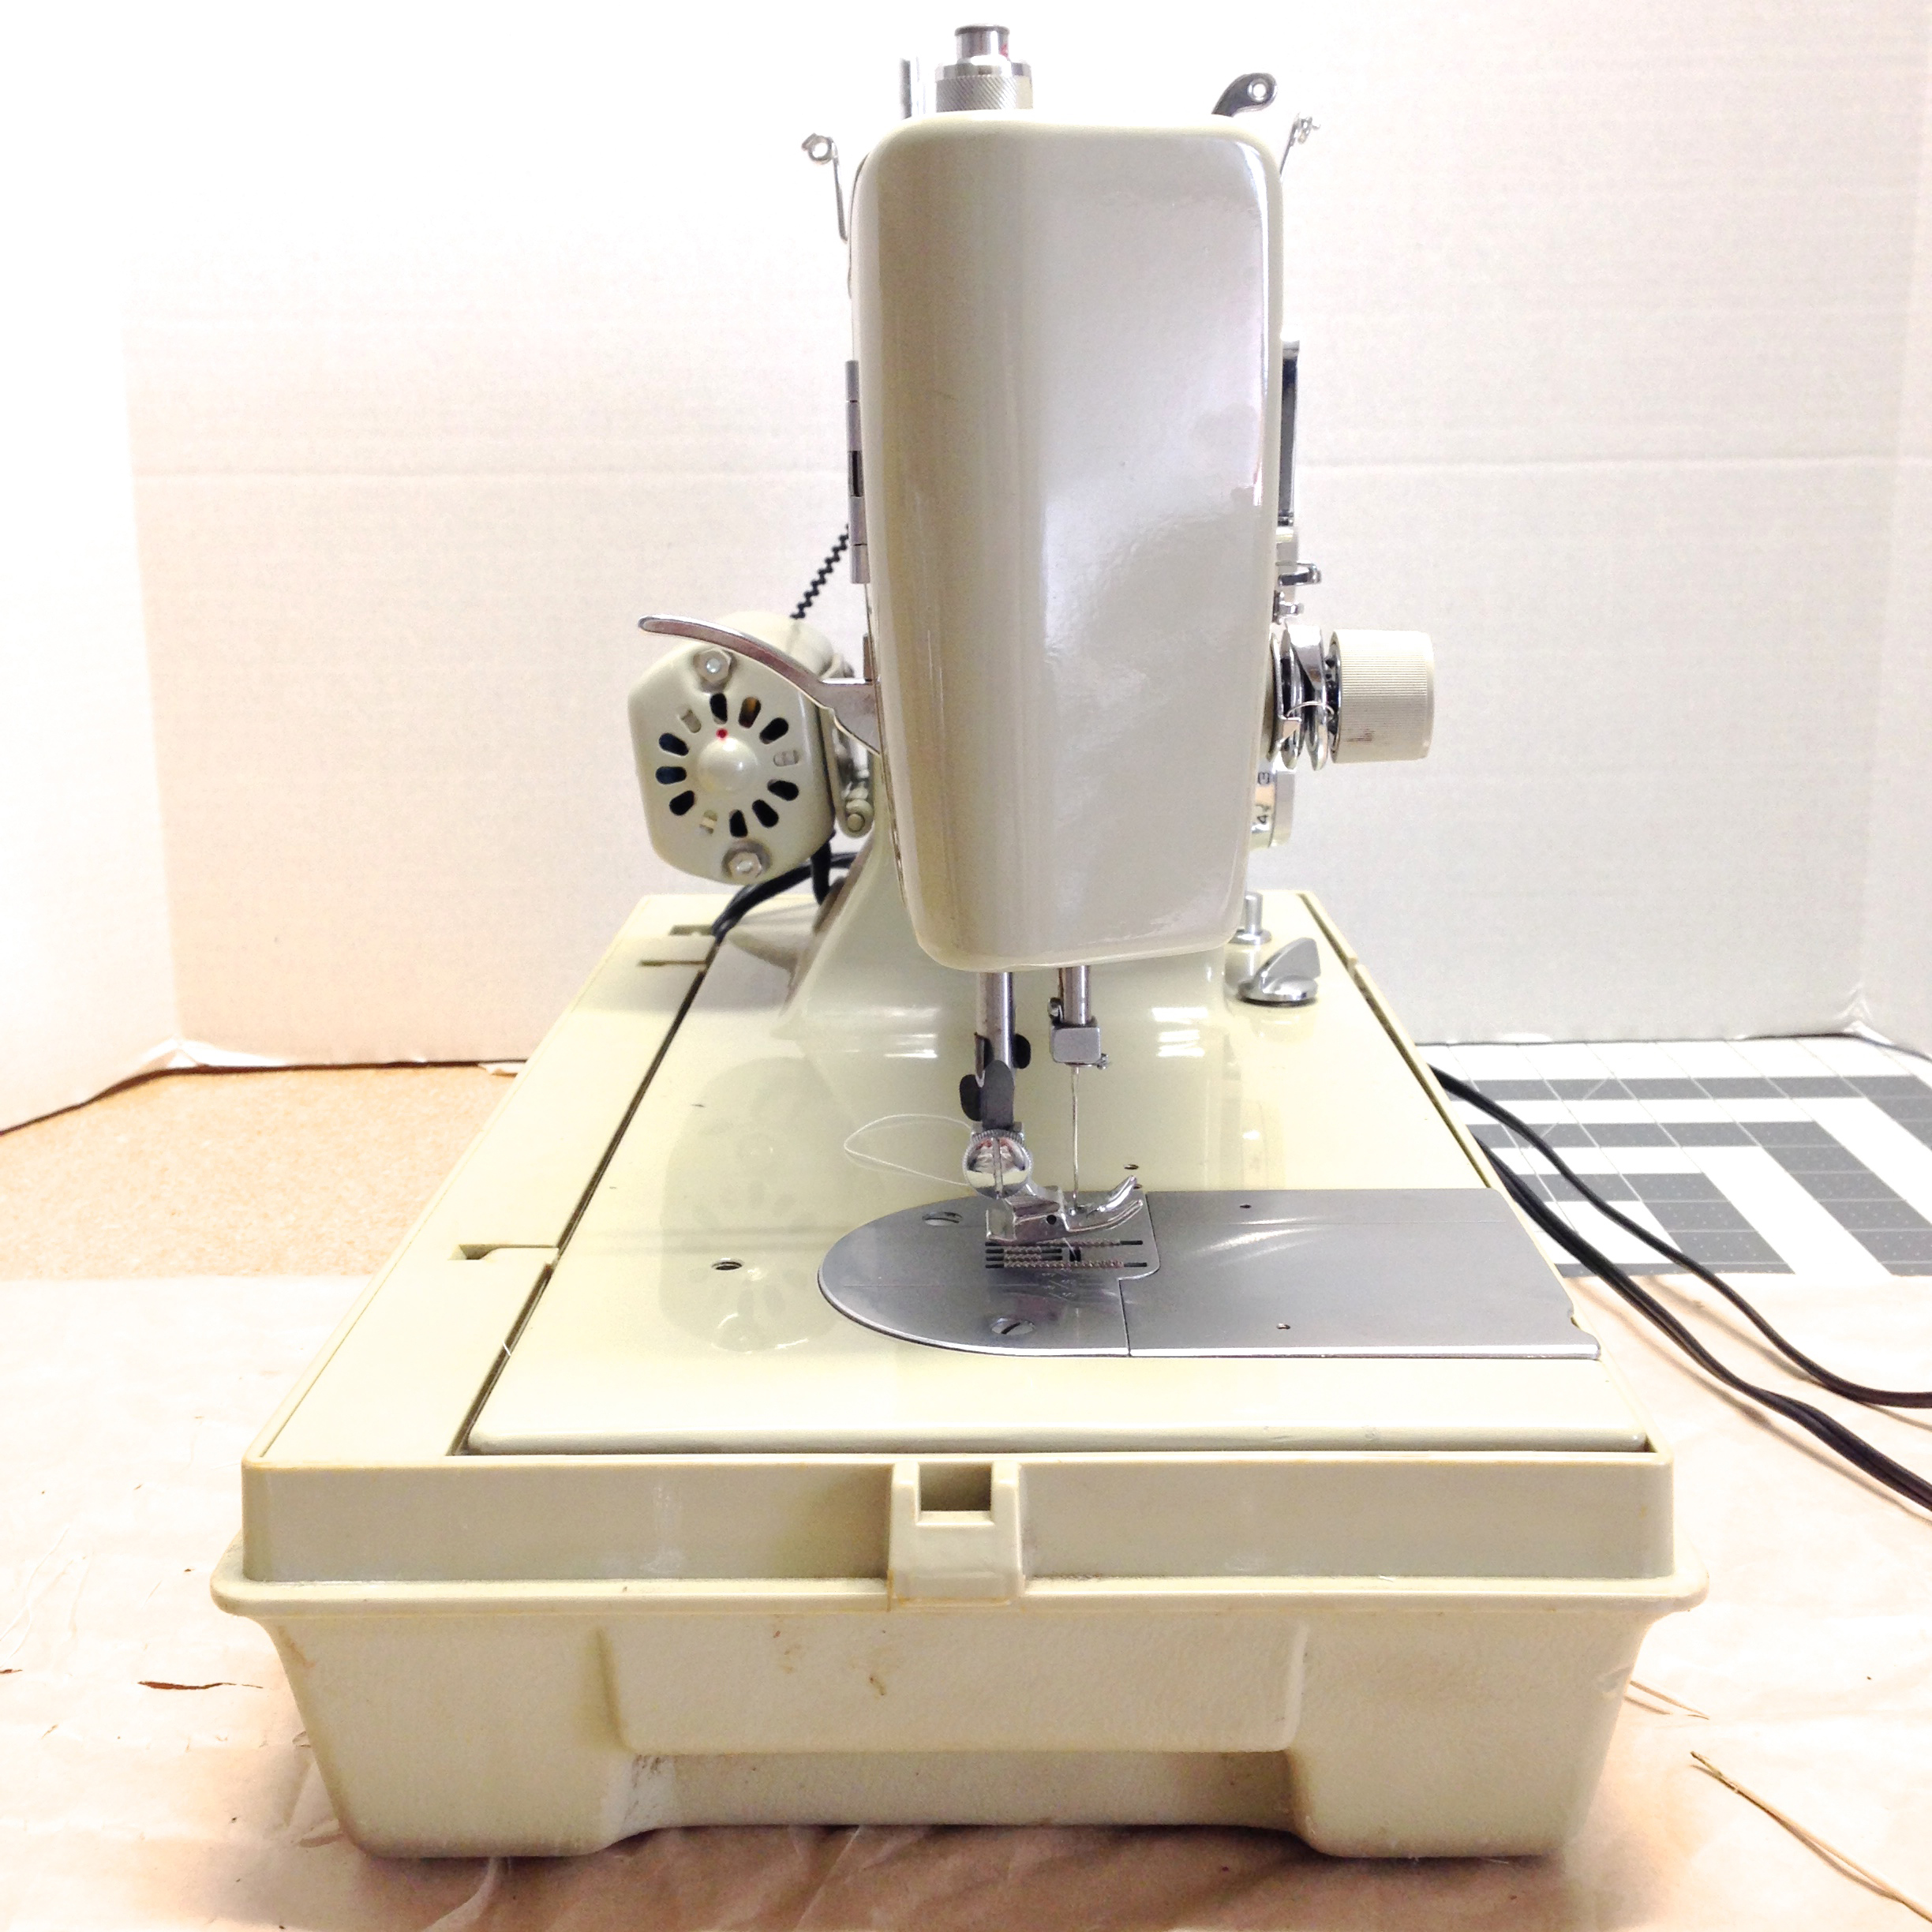 Sears Kenmore Model 158.151 sewing machine. Light and motor work, needle  does not go up/down. - AAA Auction and Realty